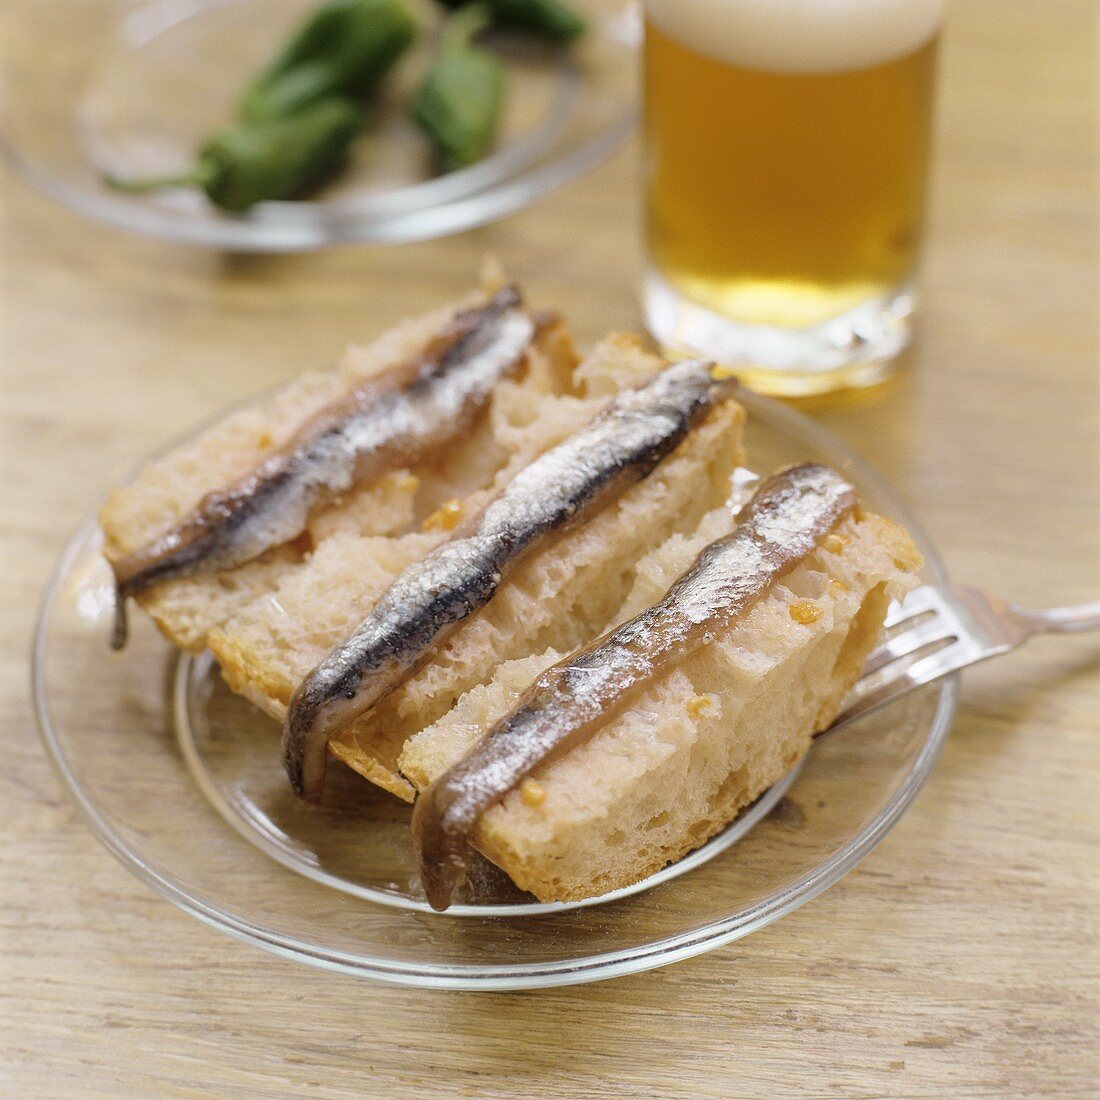 Anchovy fillets on slices of white bread